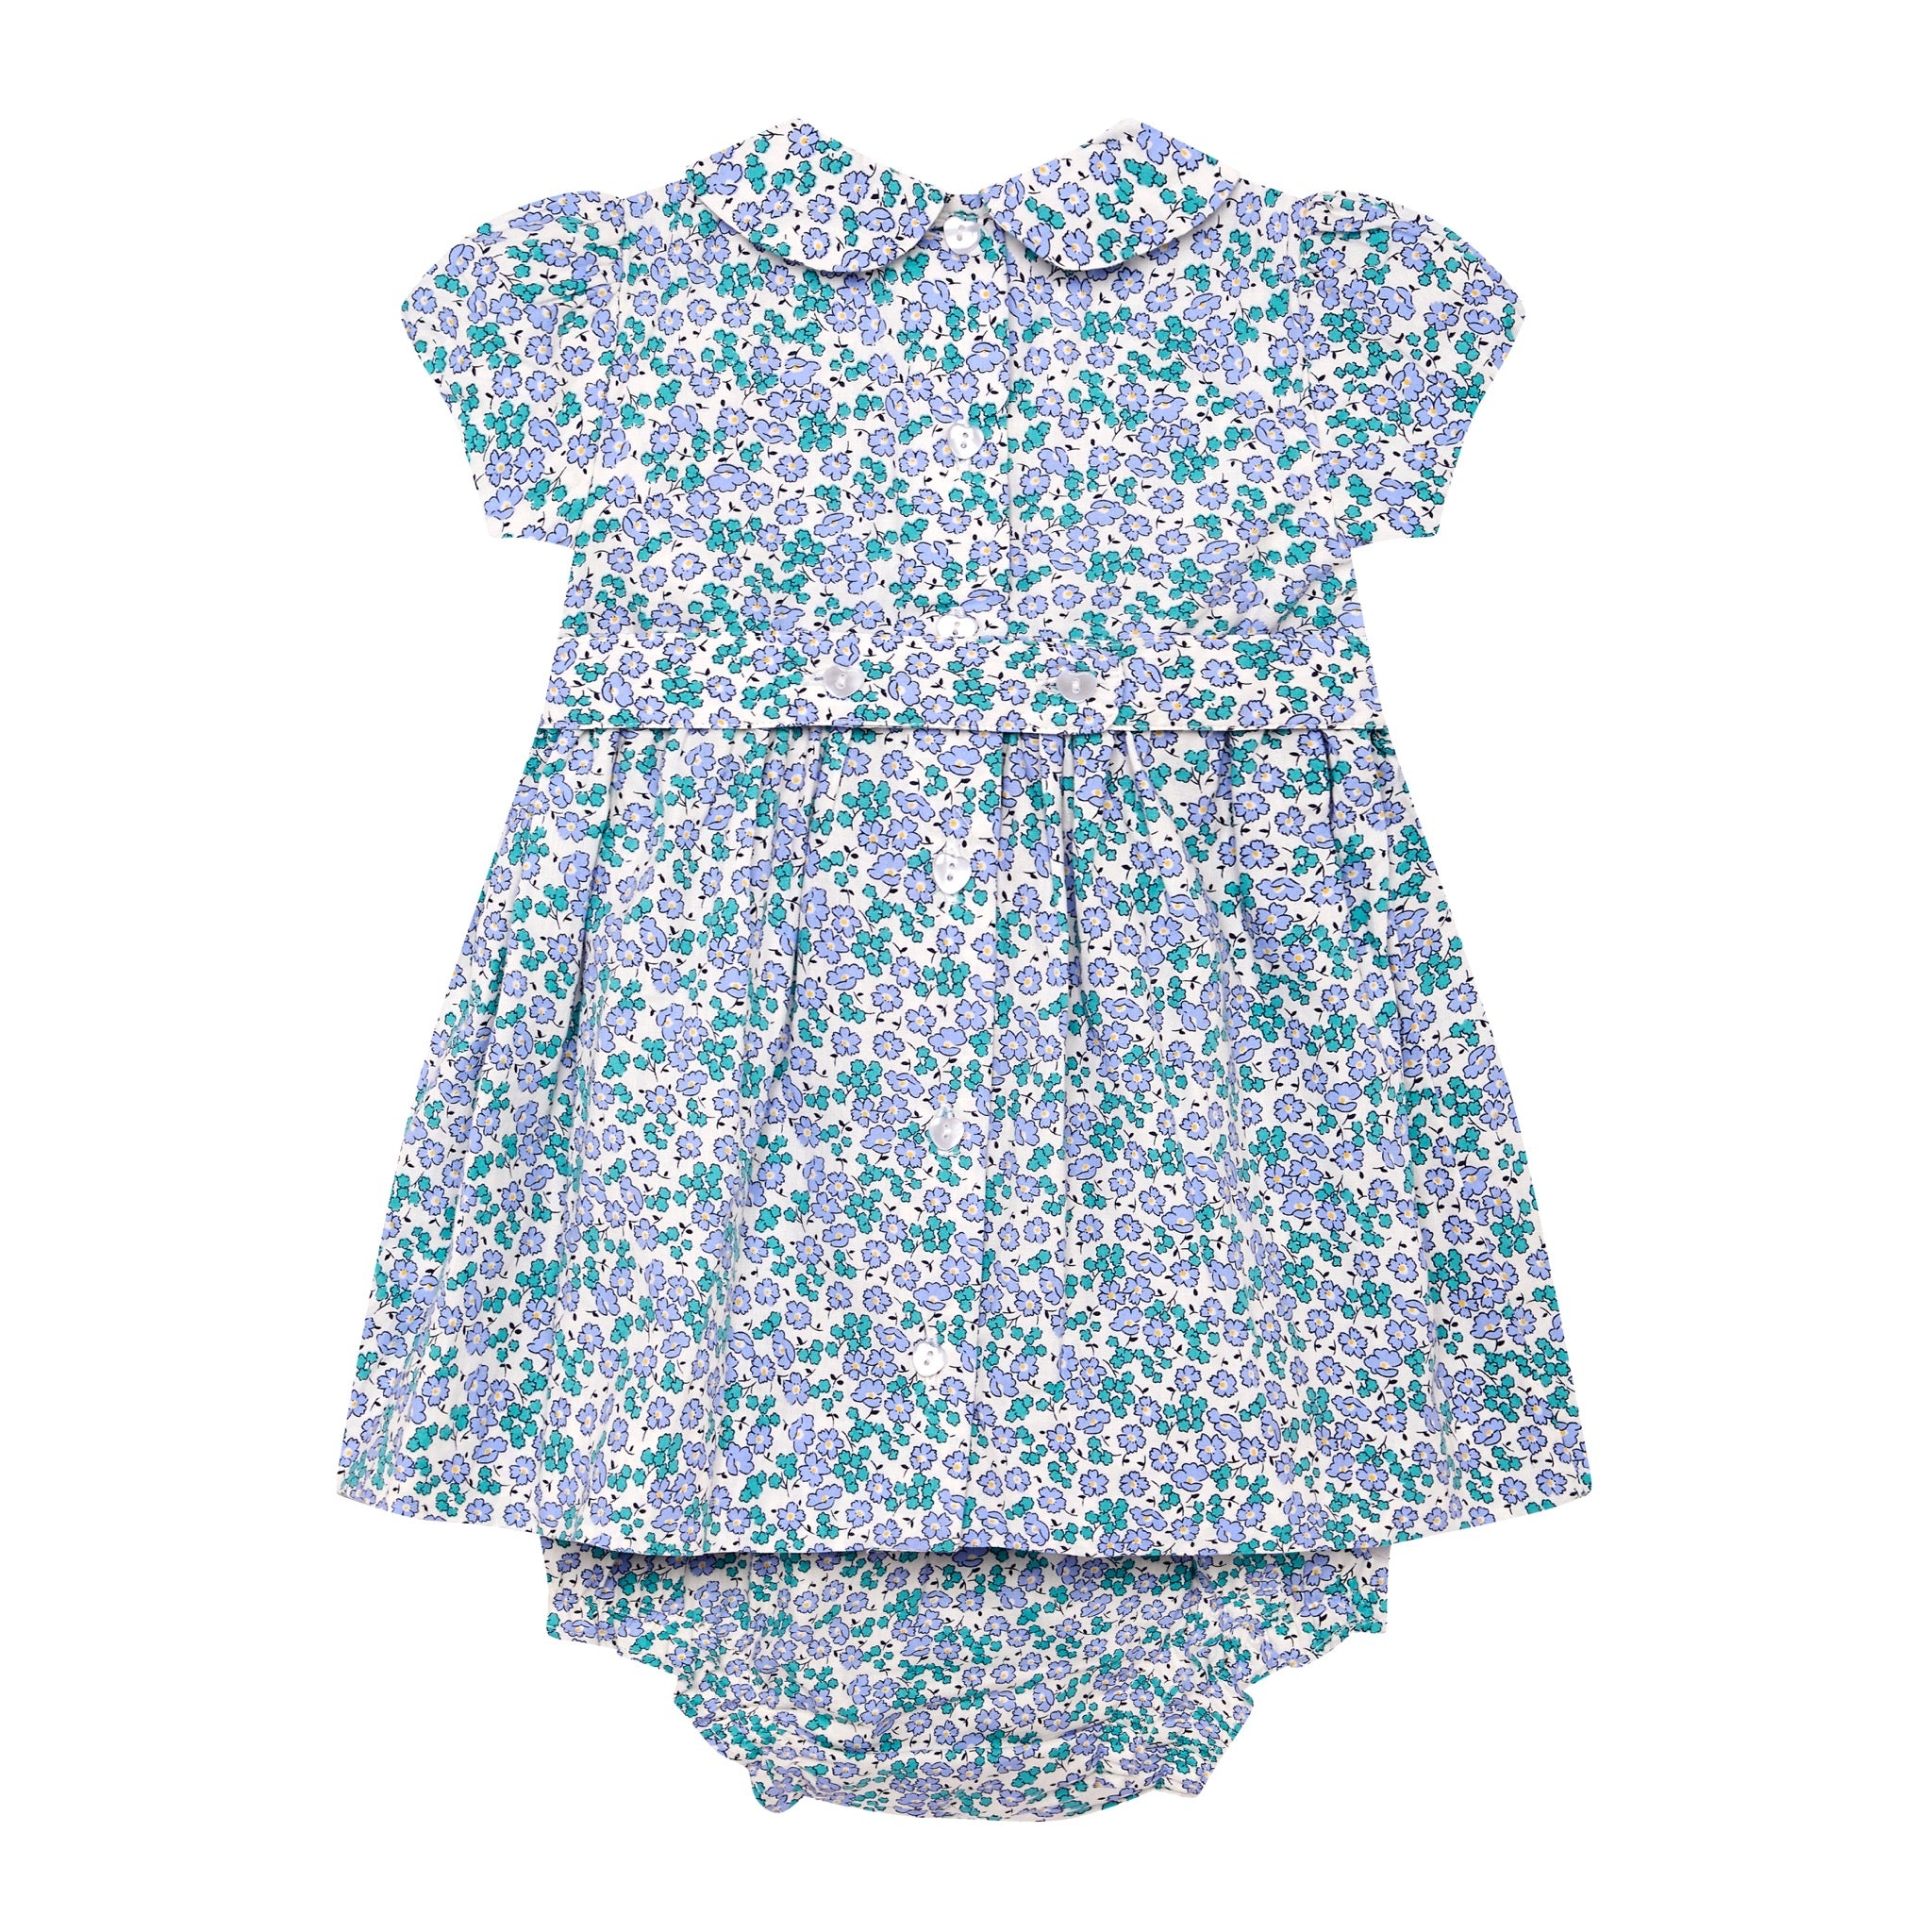  Floral dress with bloomers, hand-smocked, made from 100% cotton, back